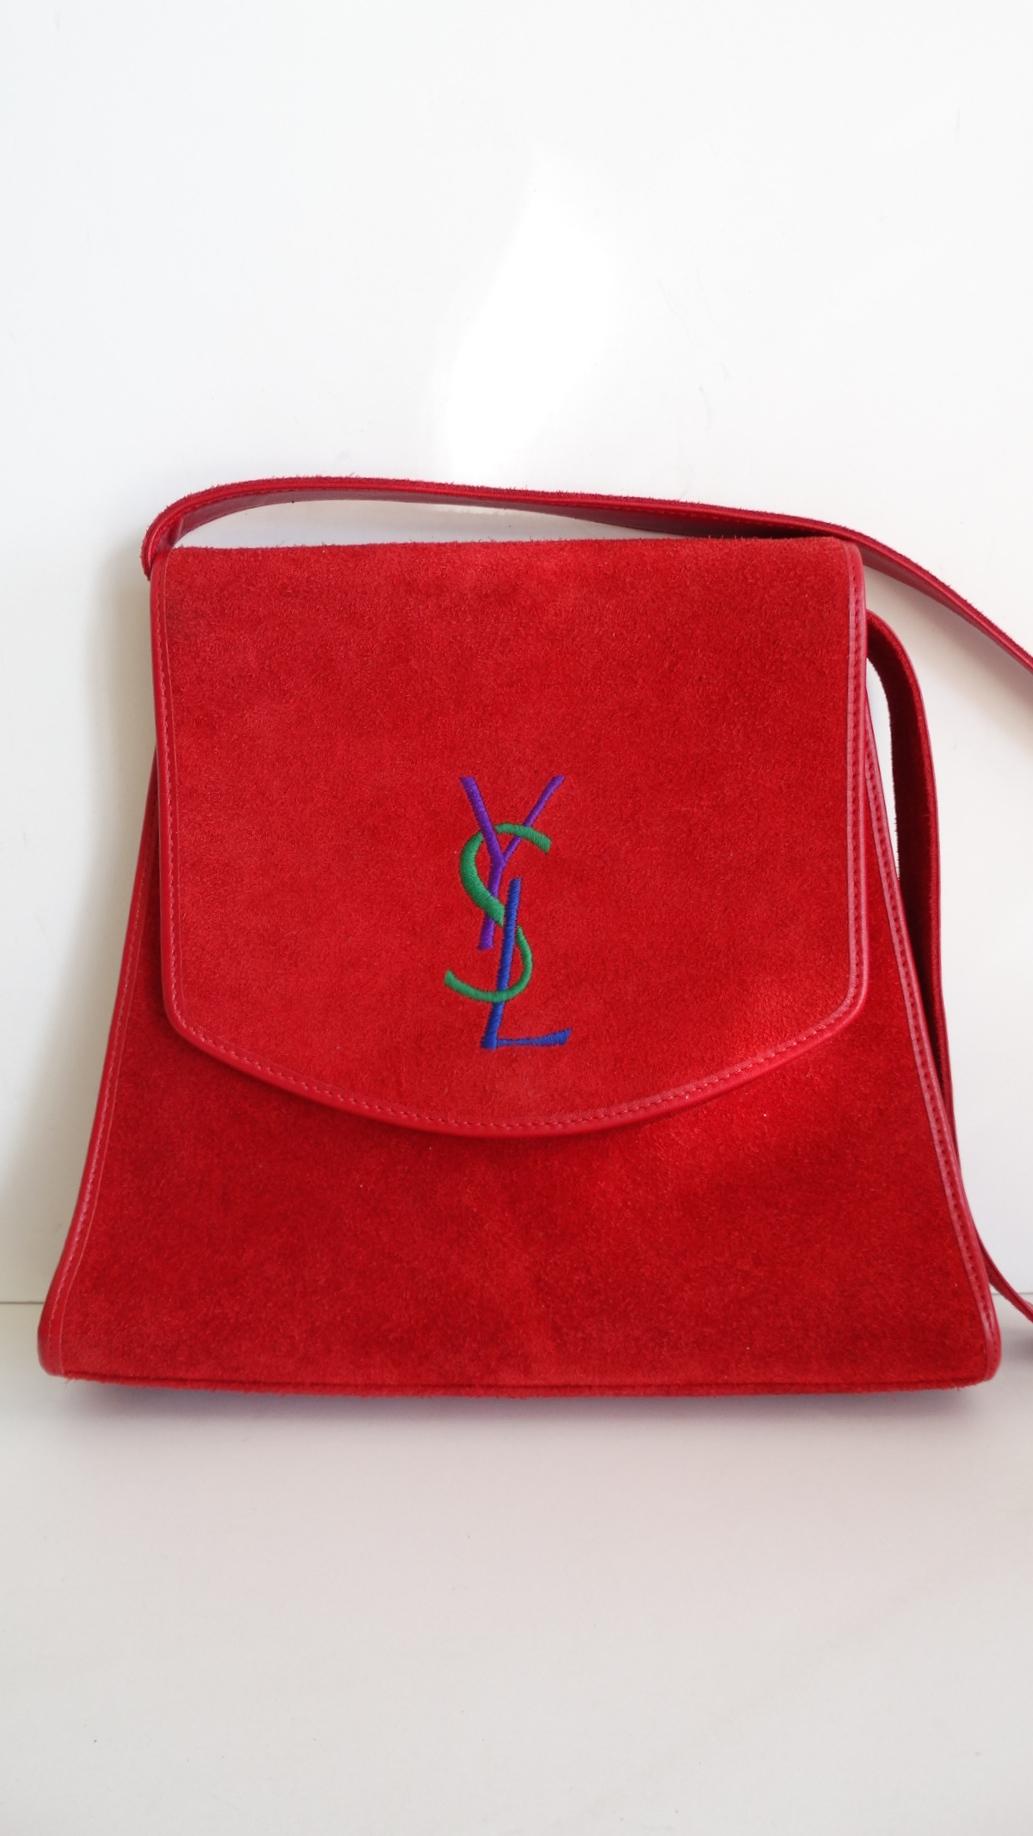 The Most Adorable Bag Is Here And We Are Obsessed! Circa 1980s, this Yves Saint Laurent cross body bag is lipstick red suede and includes a tonal leather trim. Features a contrasting purple,green and blue YSL stitched on the front. Includes gold